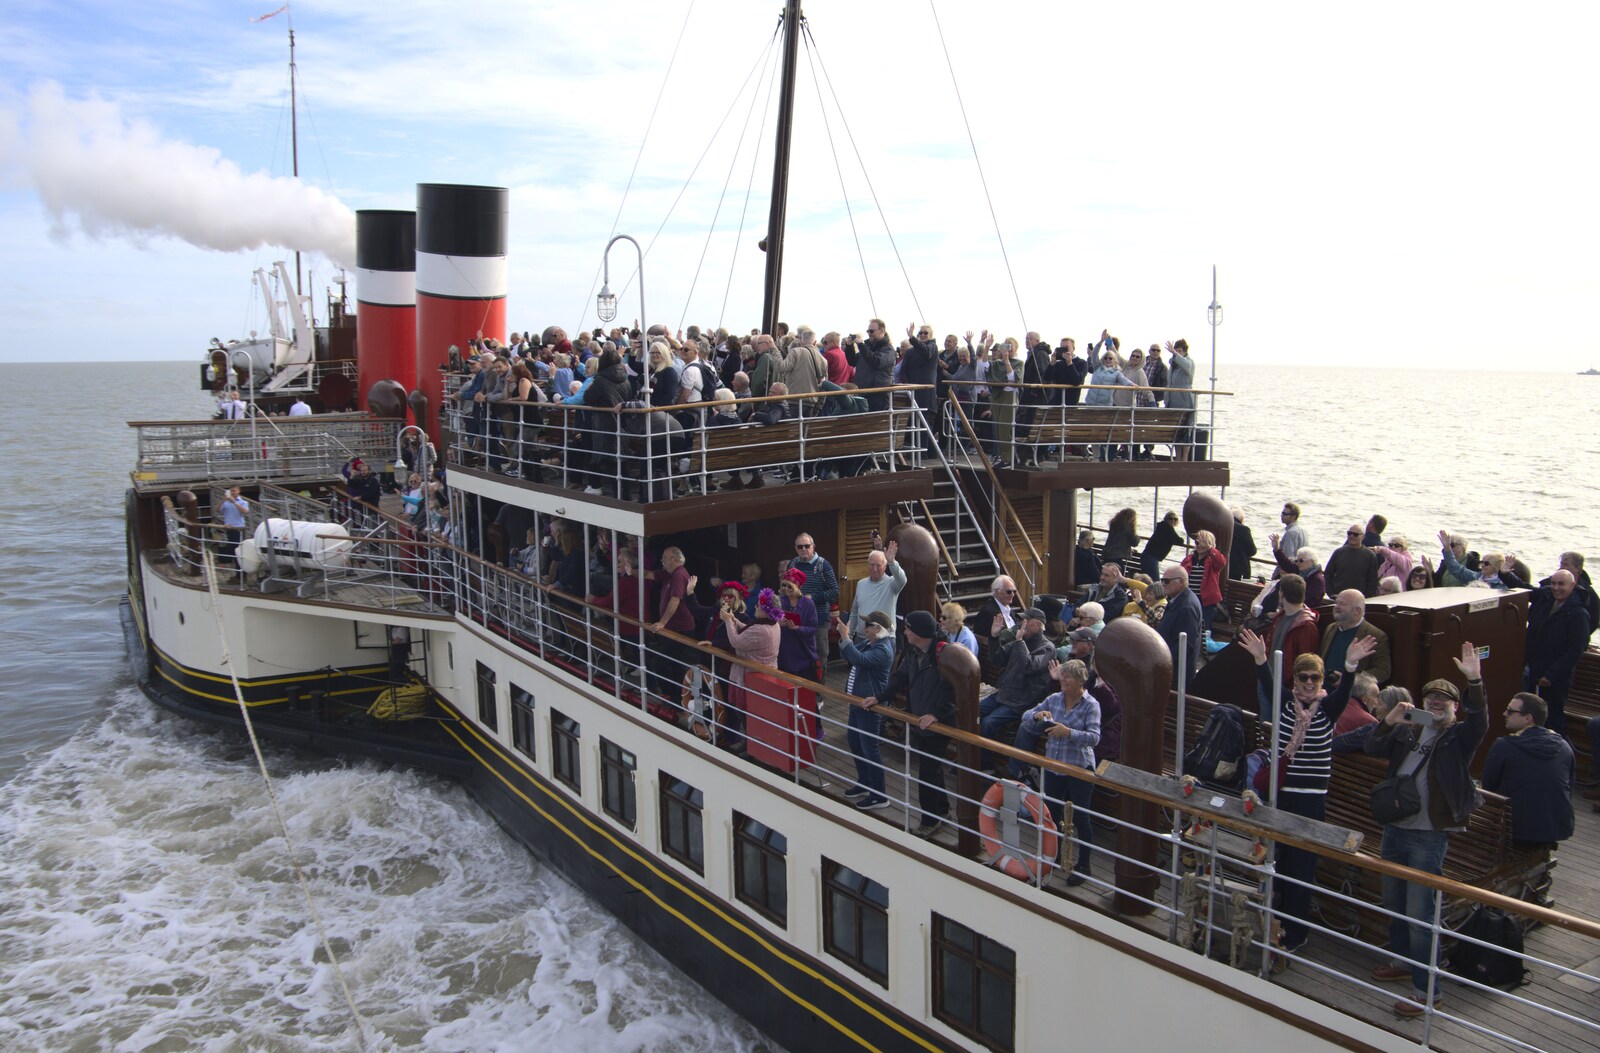 A crowded paddle steamer from The Waverley Paddle Steamer at Southwold Pier, Suffolk - 27th September 2023